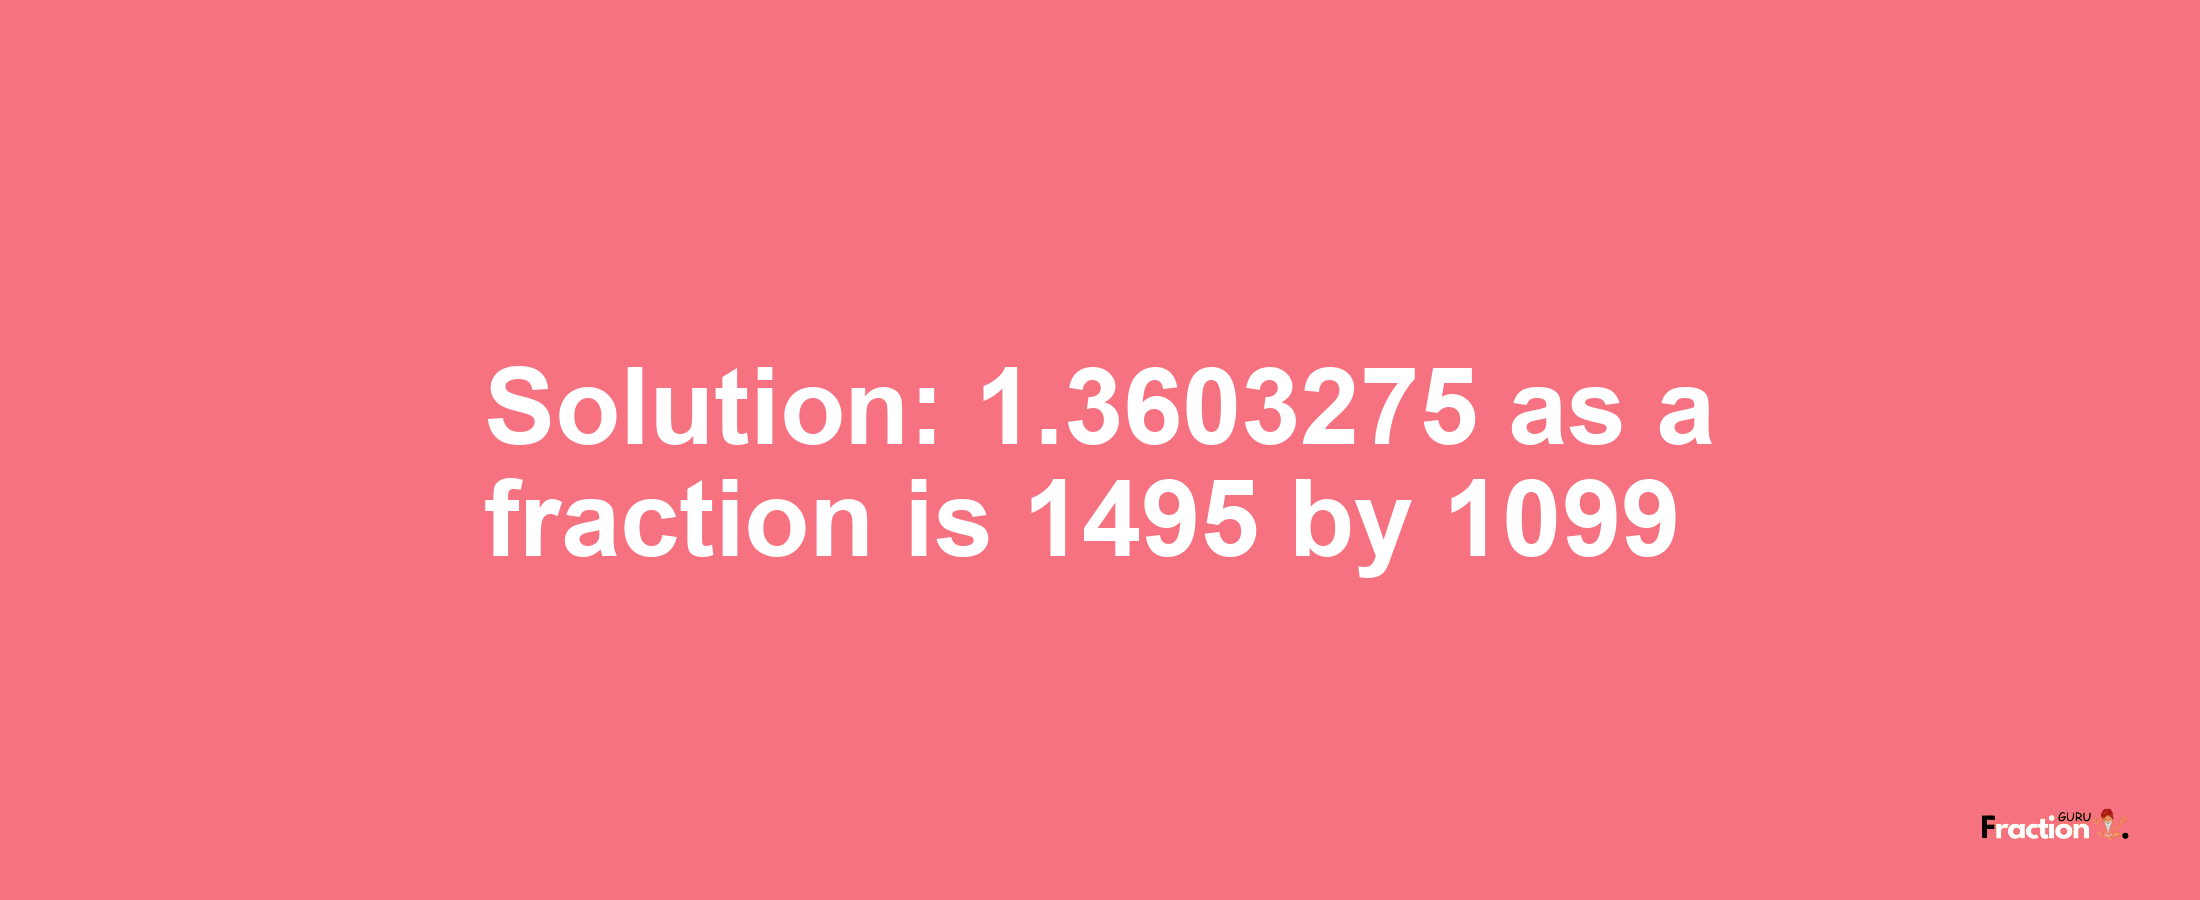 Solution:1.3603275 as a fraction is 1495/1099